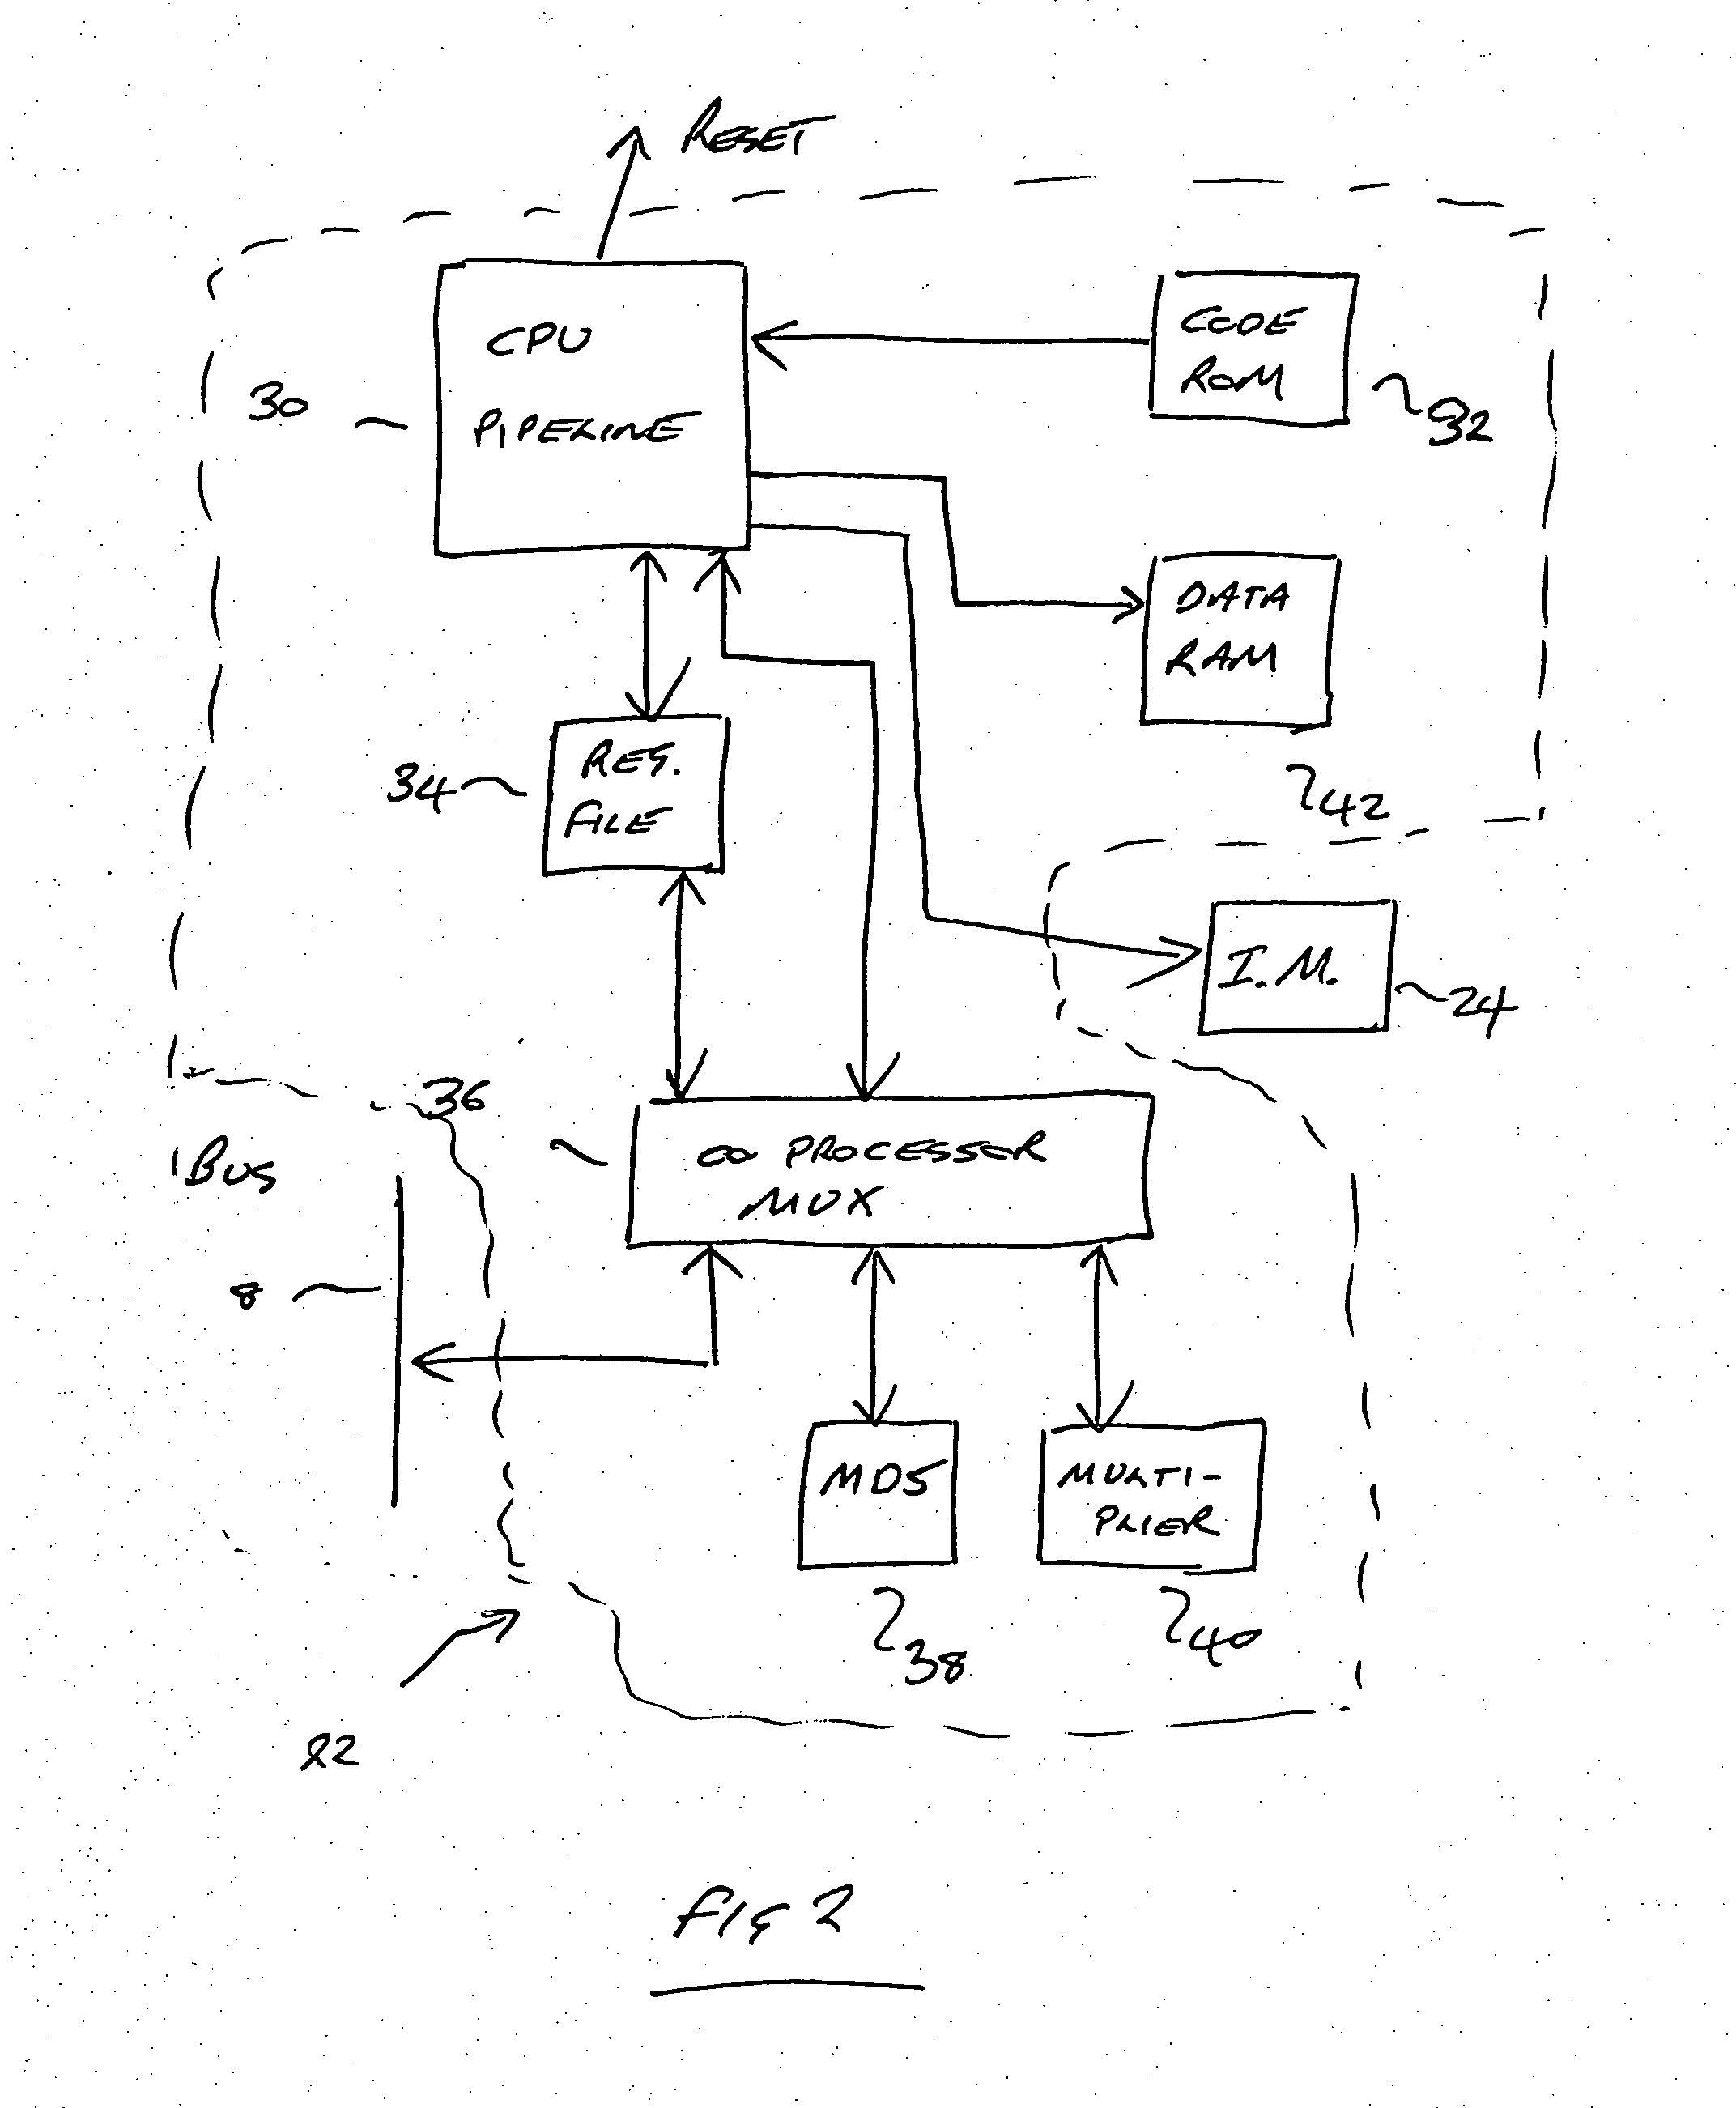 Memory security device for flexible software environment